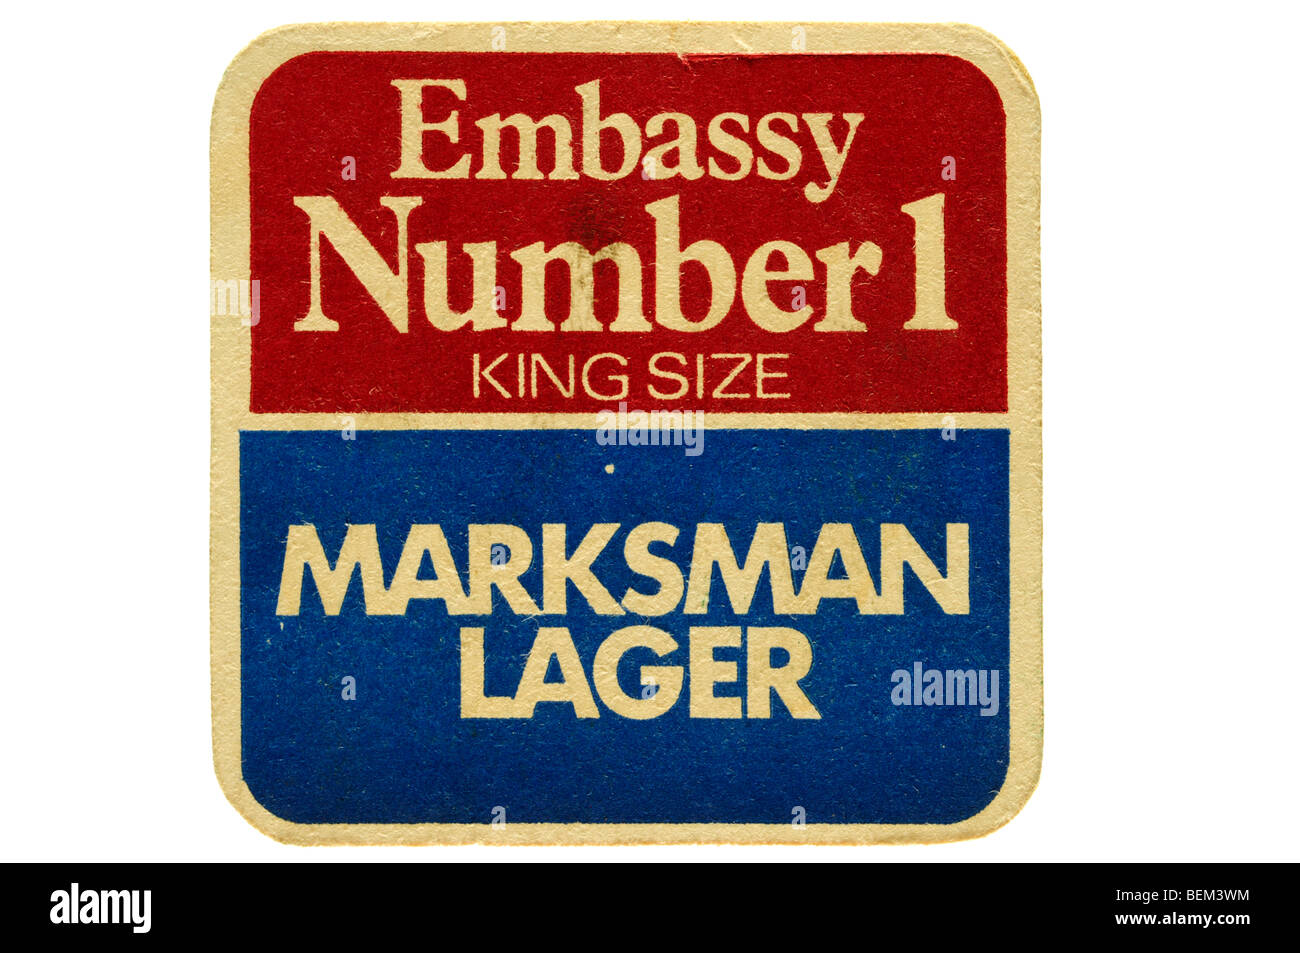 embassy number 1 king size marksman lager Stock Photo